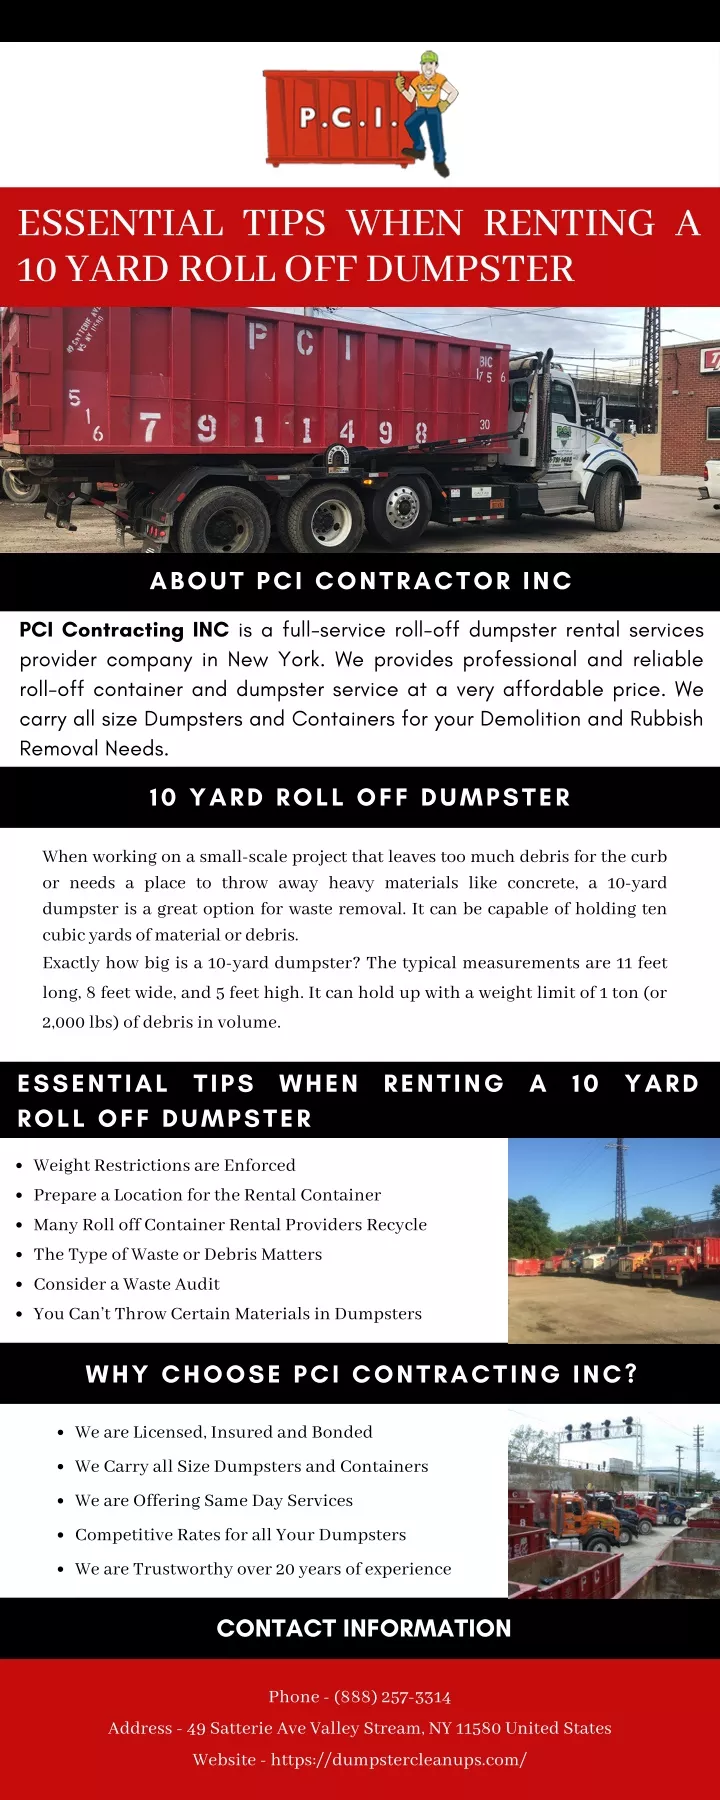 essential tips when renting a 10 yard roll